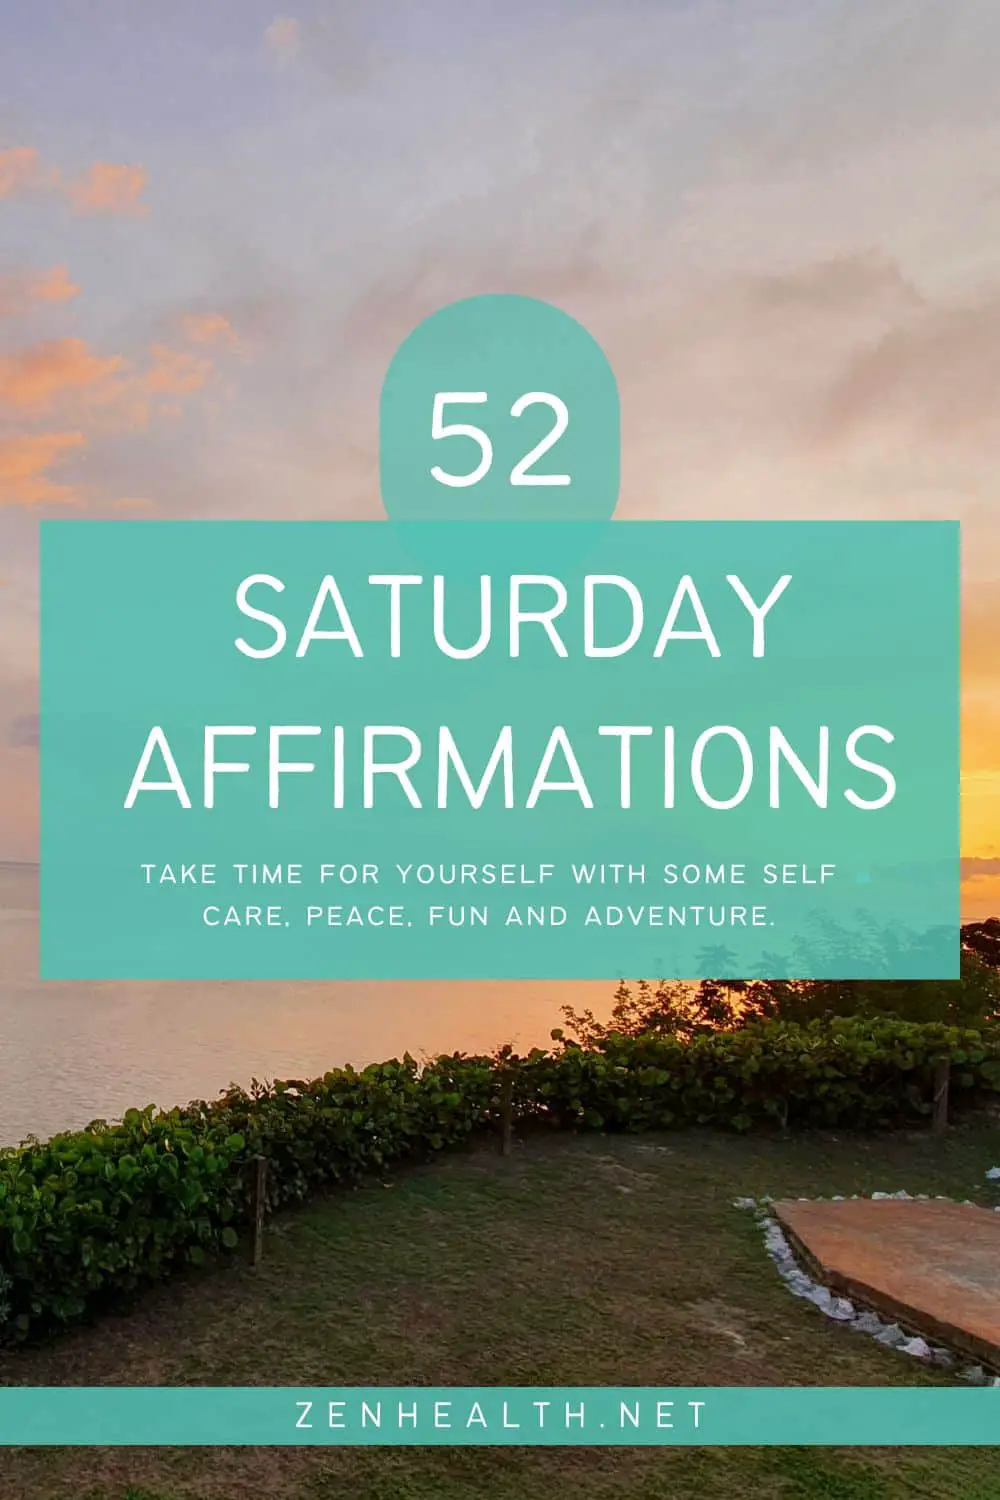 52 saturday affirmations to take time for yourself